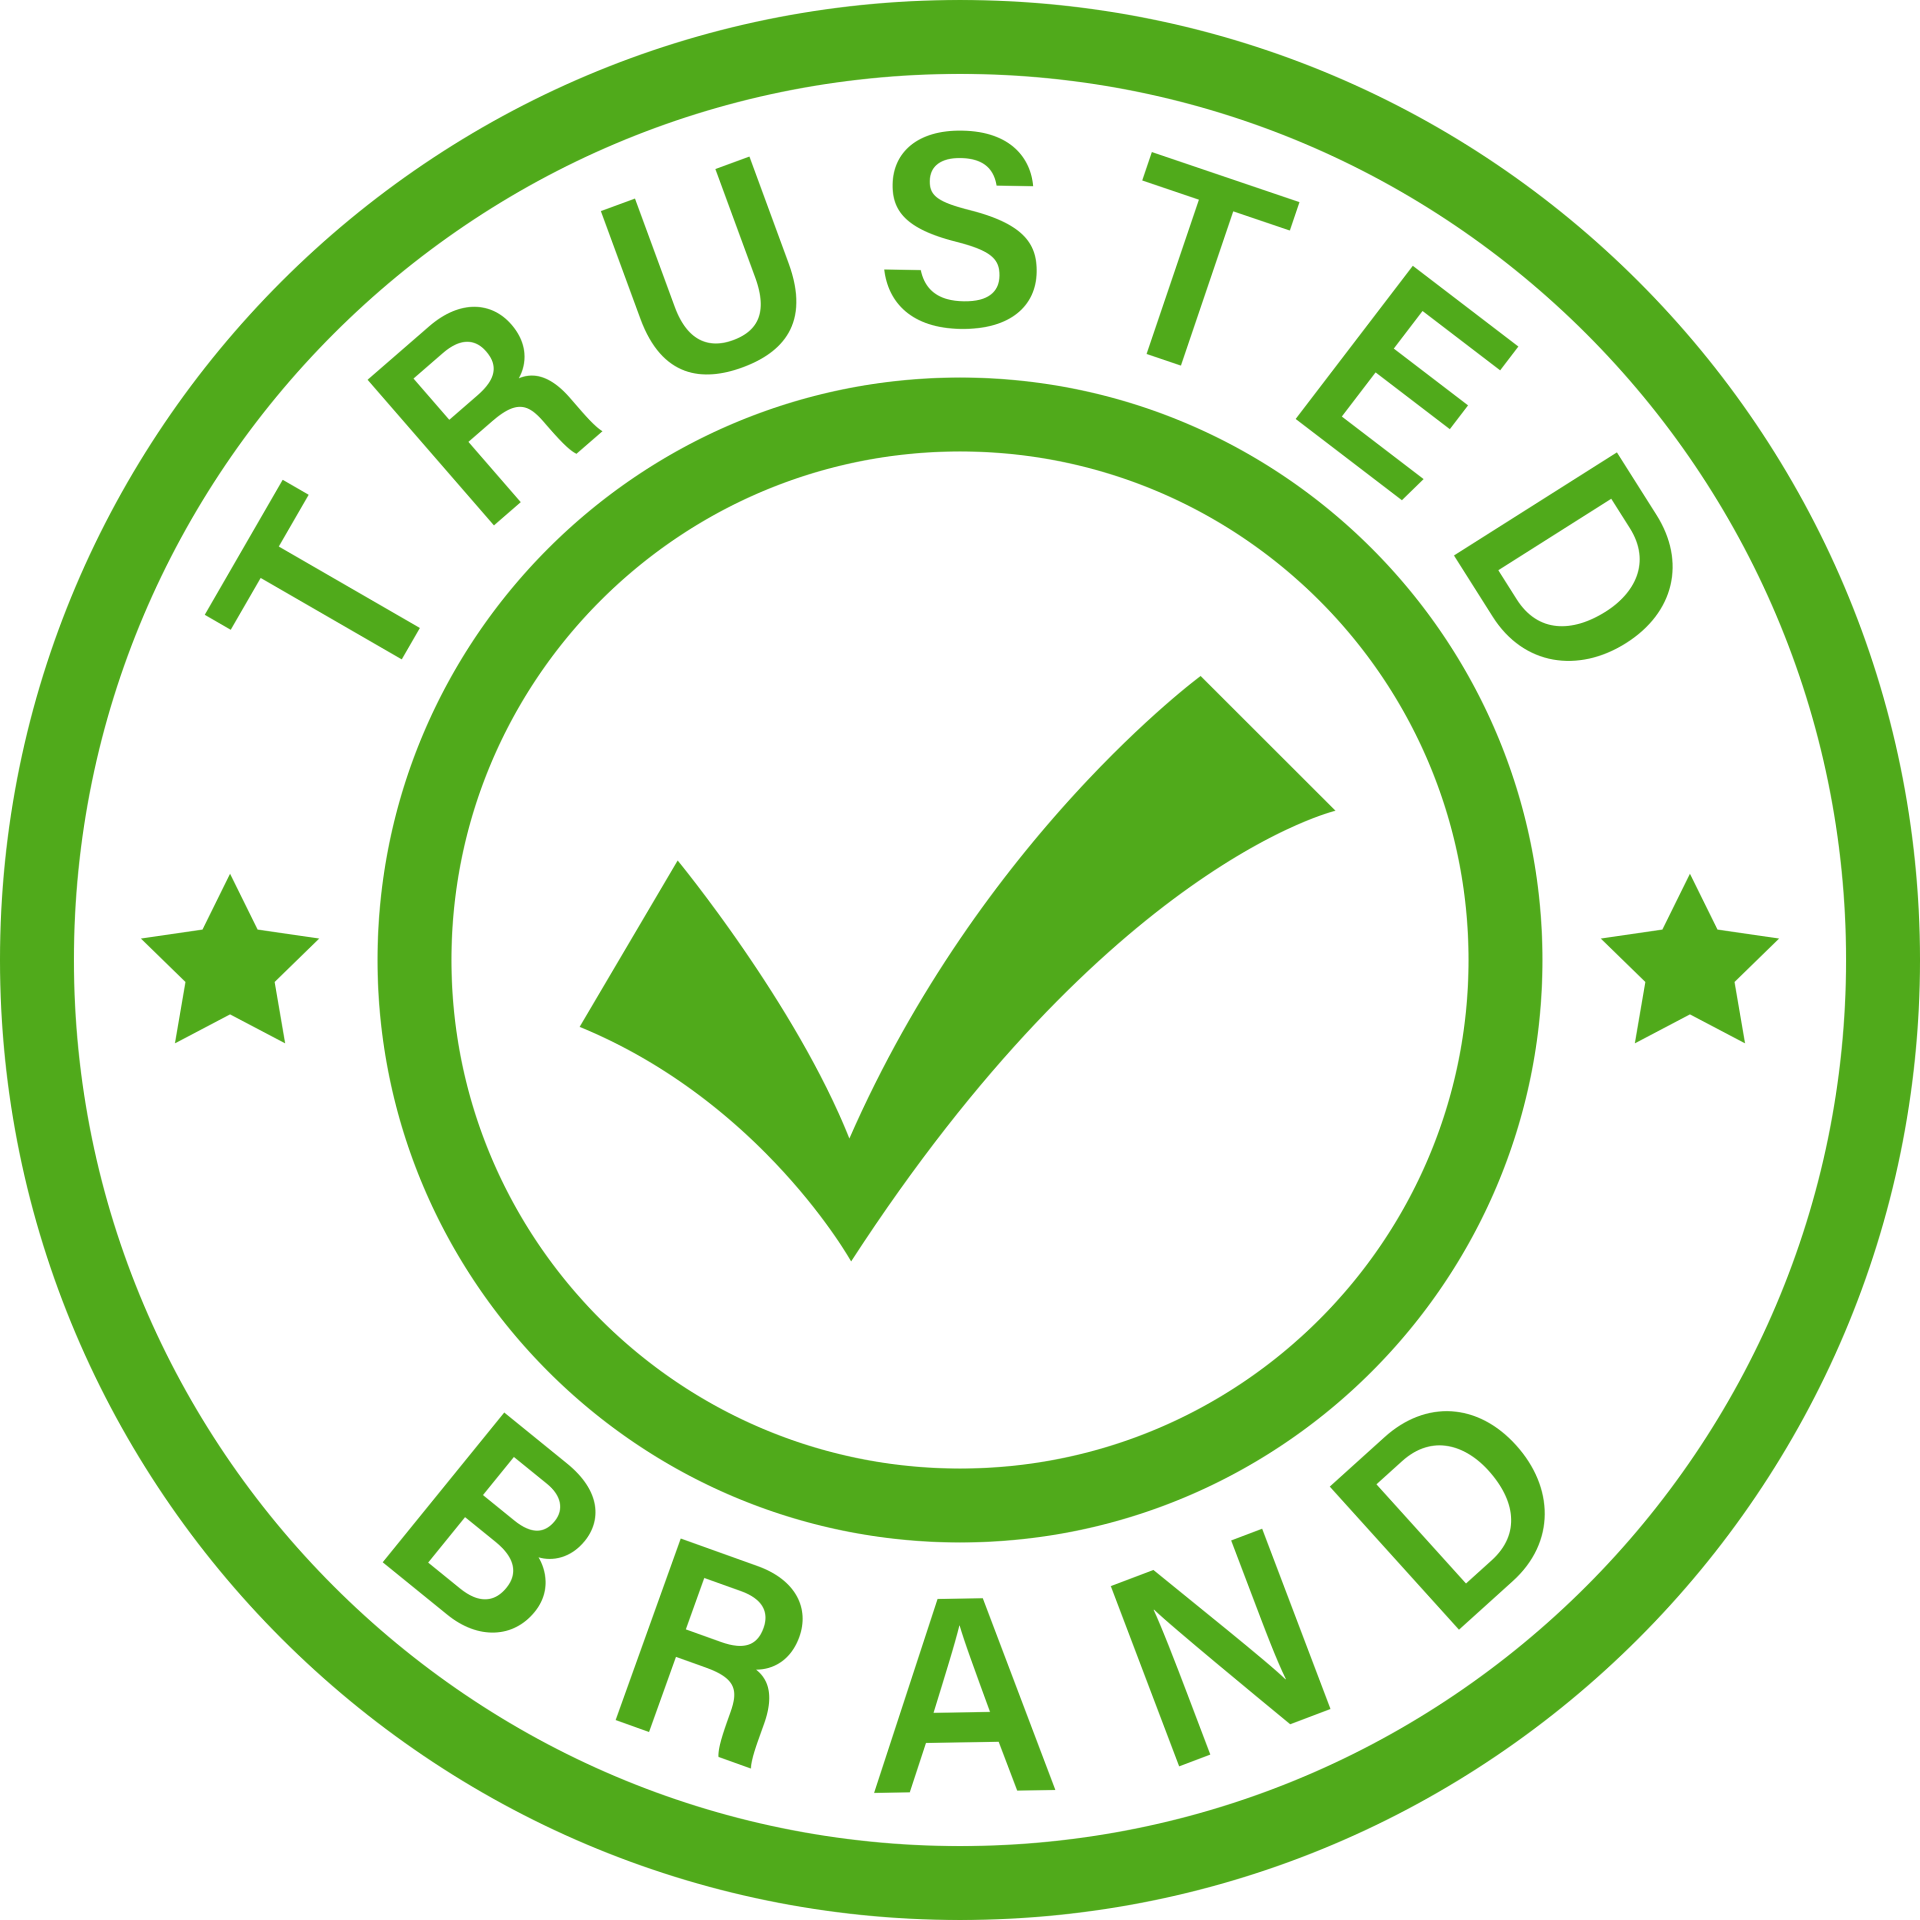 Trusted Brand badge